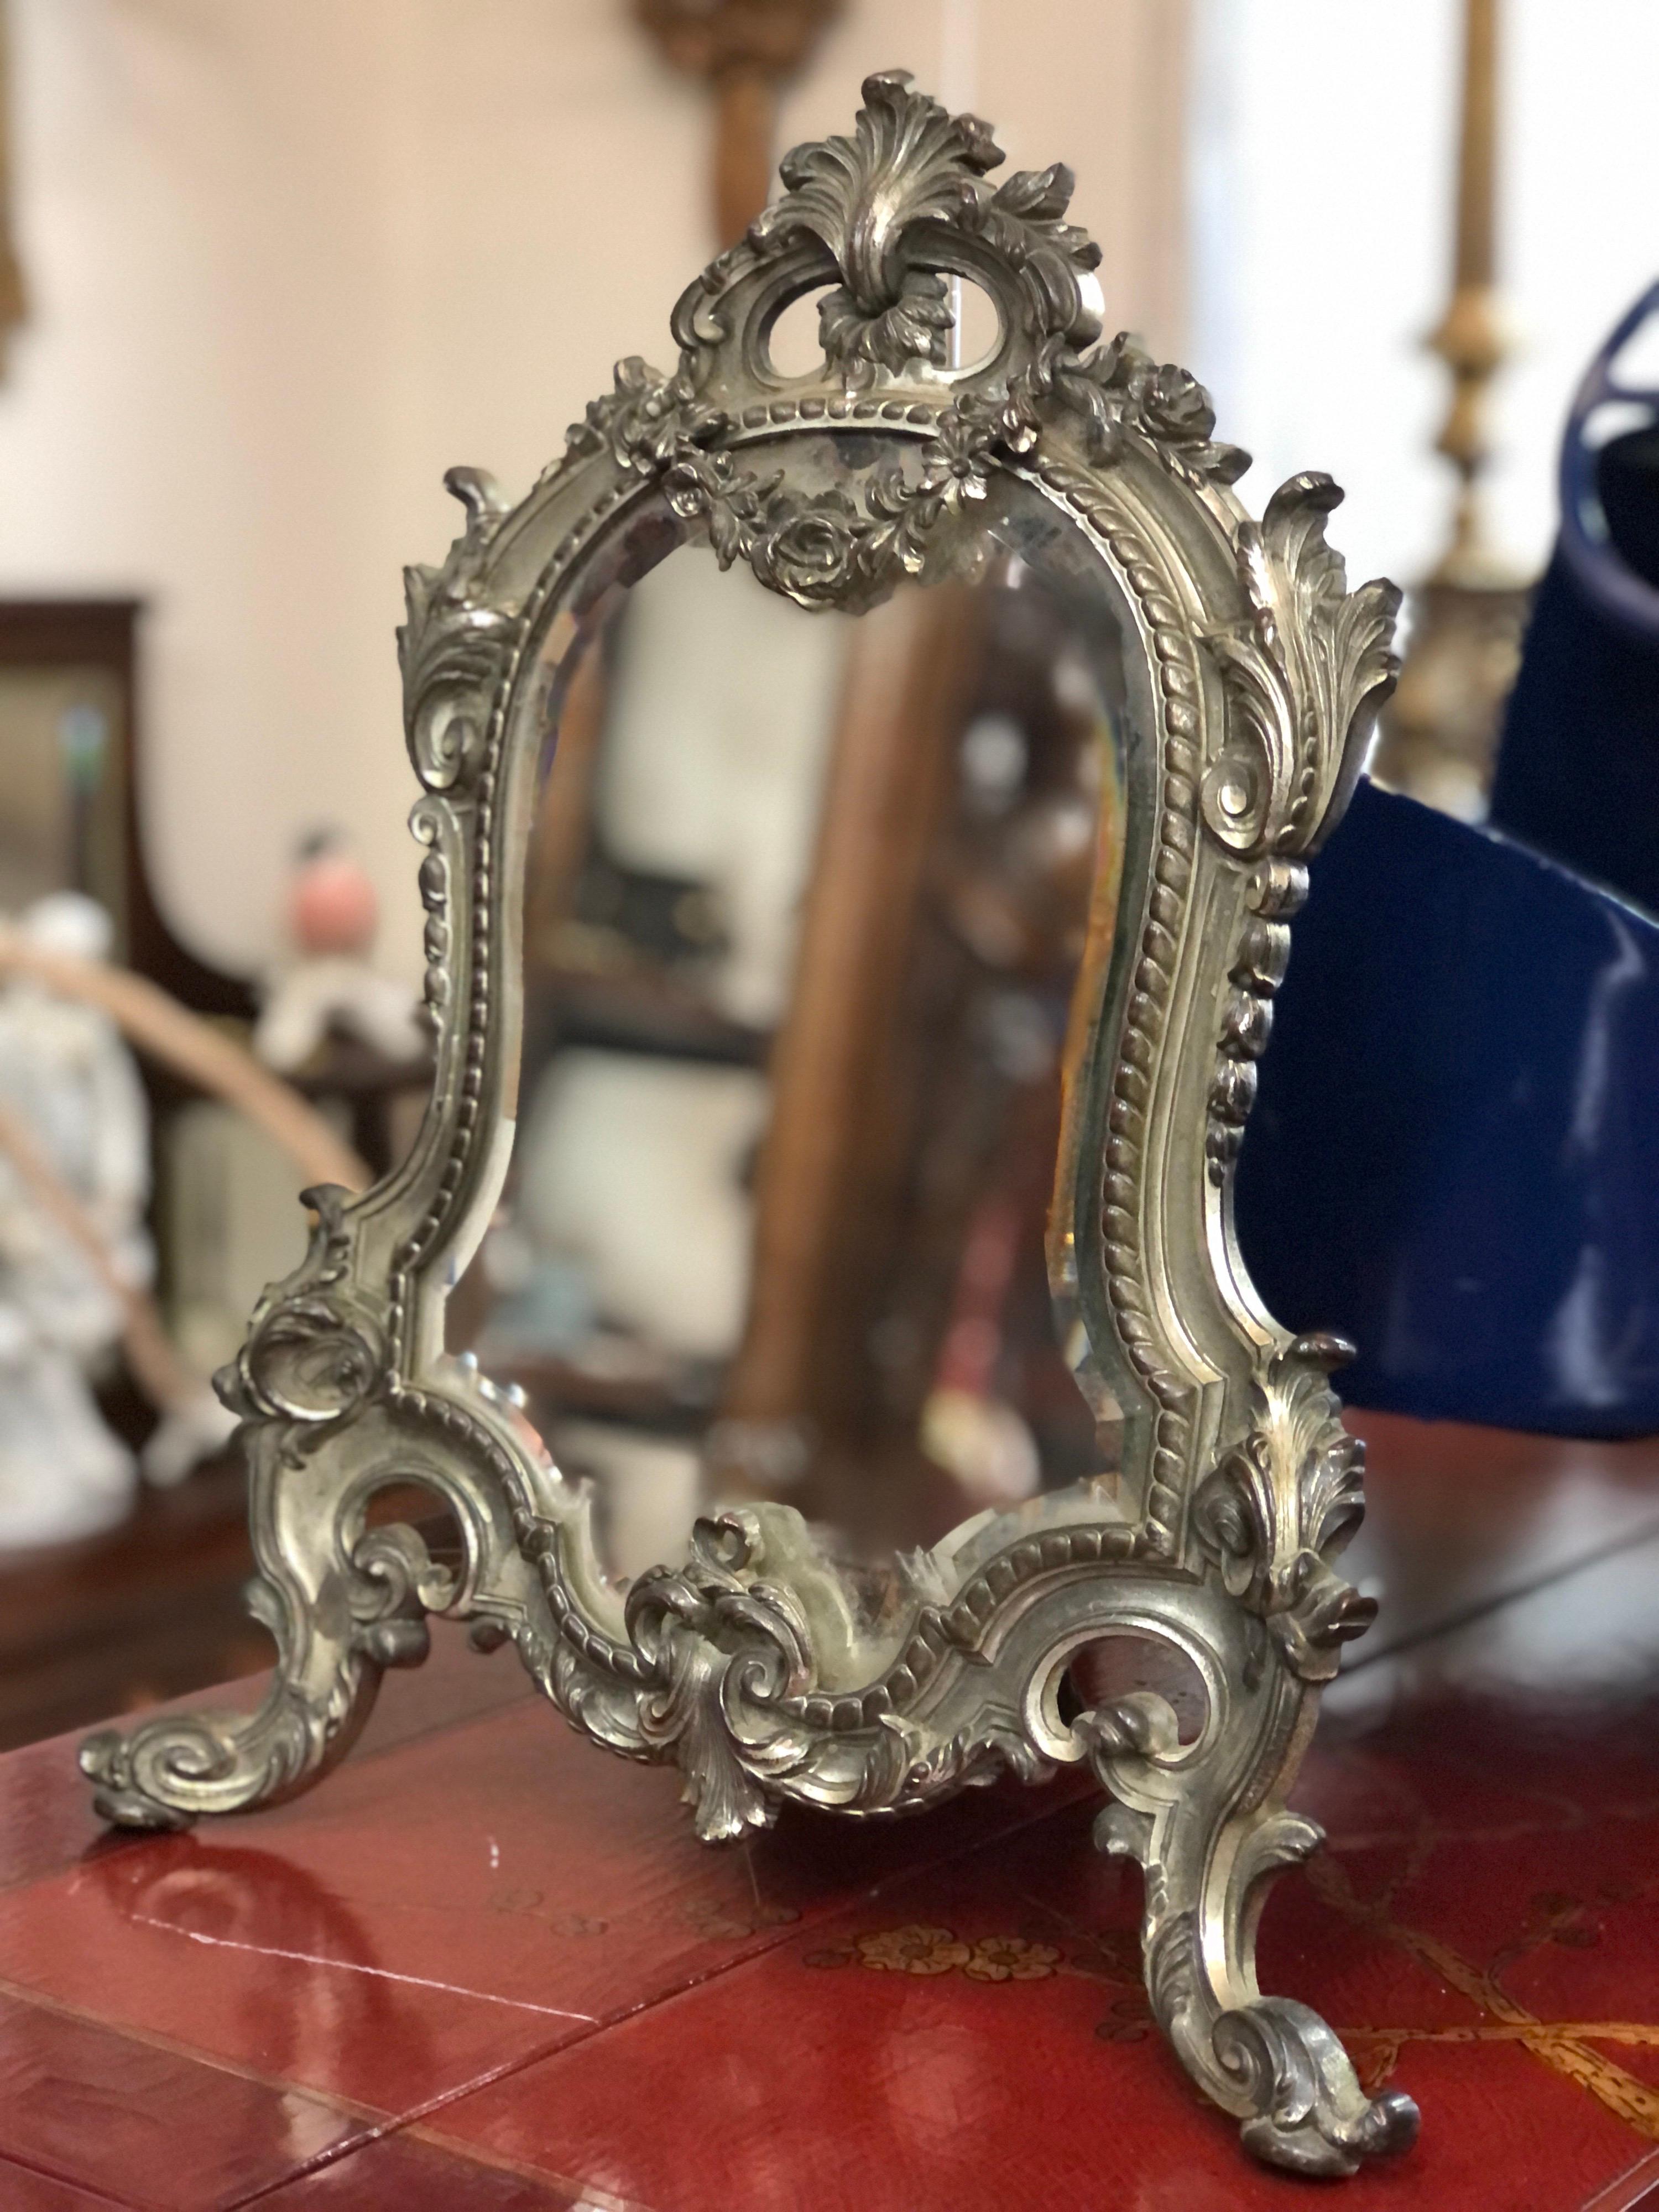 French silver plated bronze vanity mirror richly decorated in Louis XVI style.
Circa 1880.